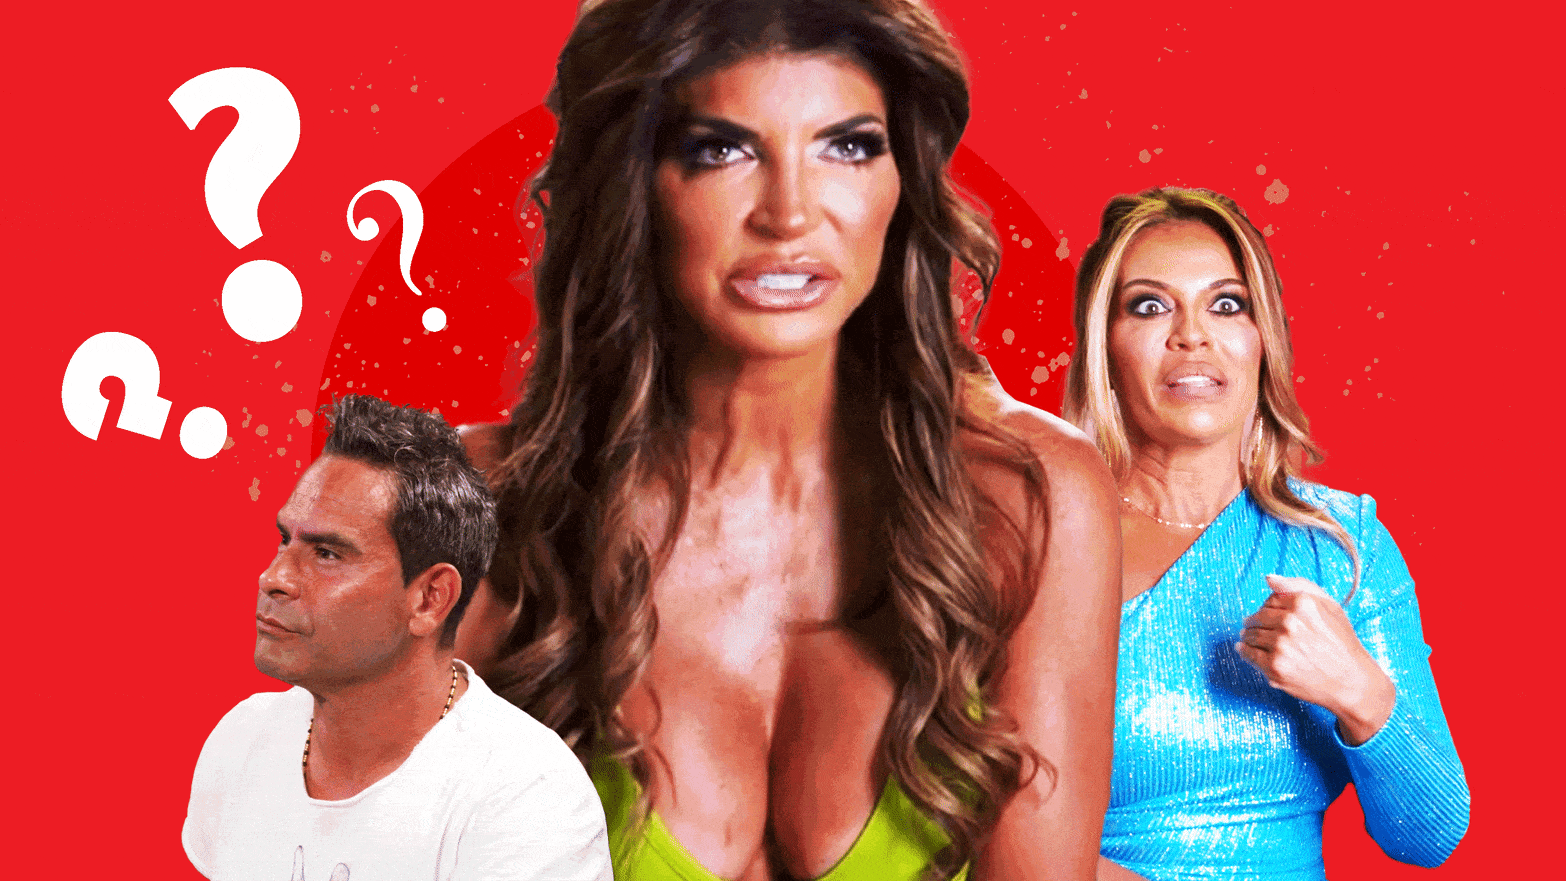 Real Housewives of New Jersey Cast Red Tans Are Out of Control pic